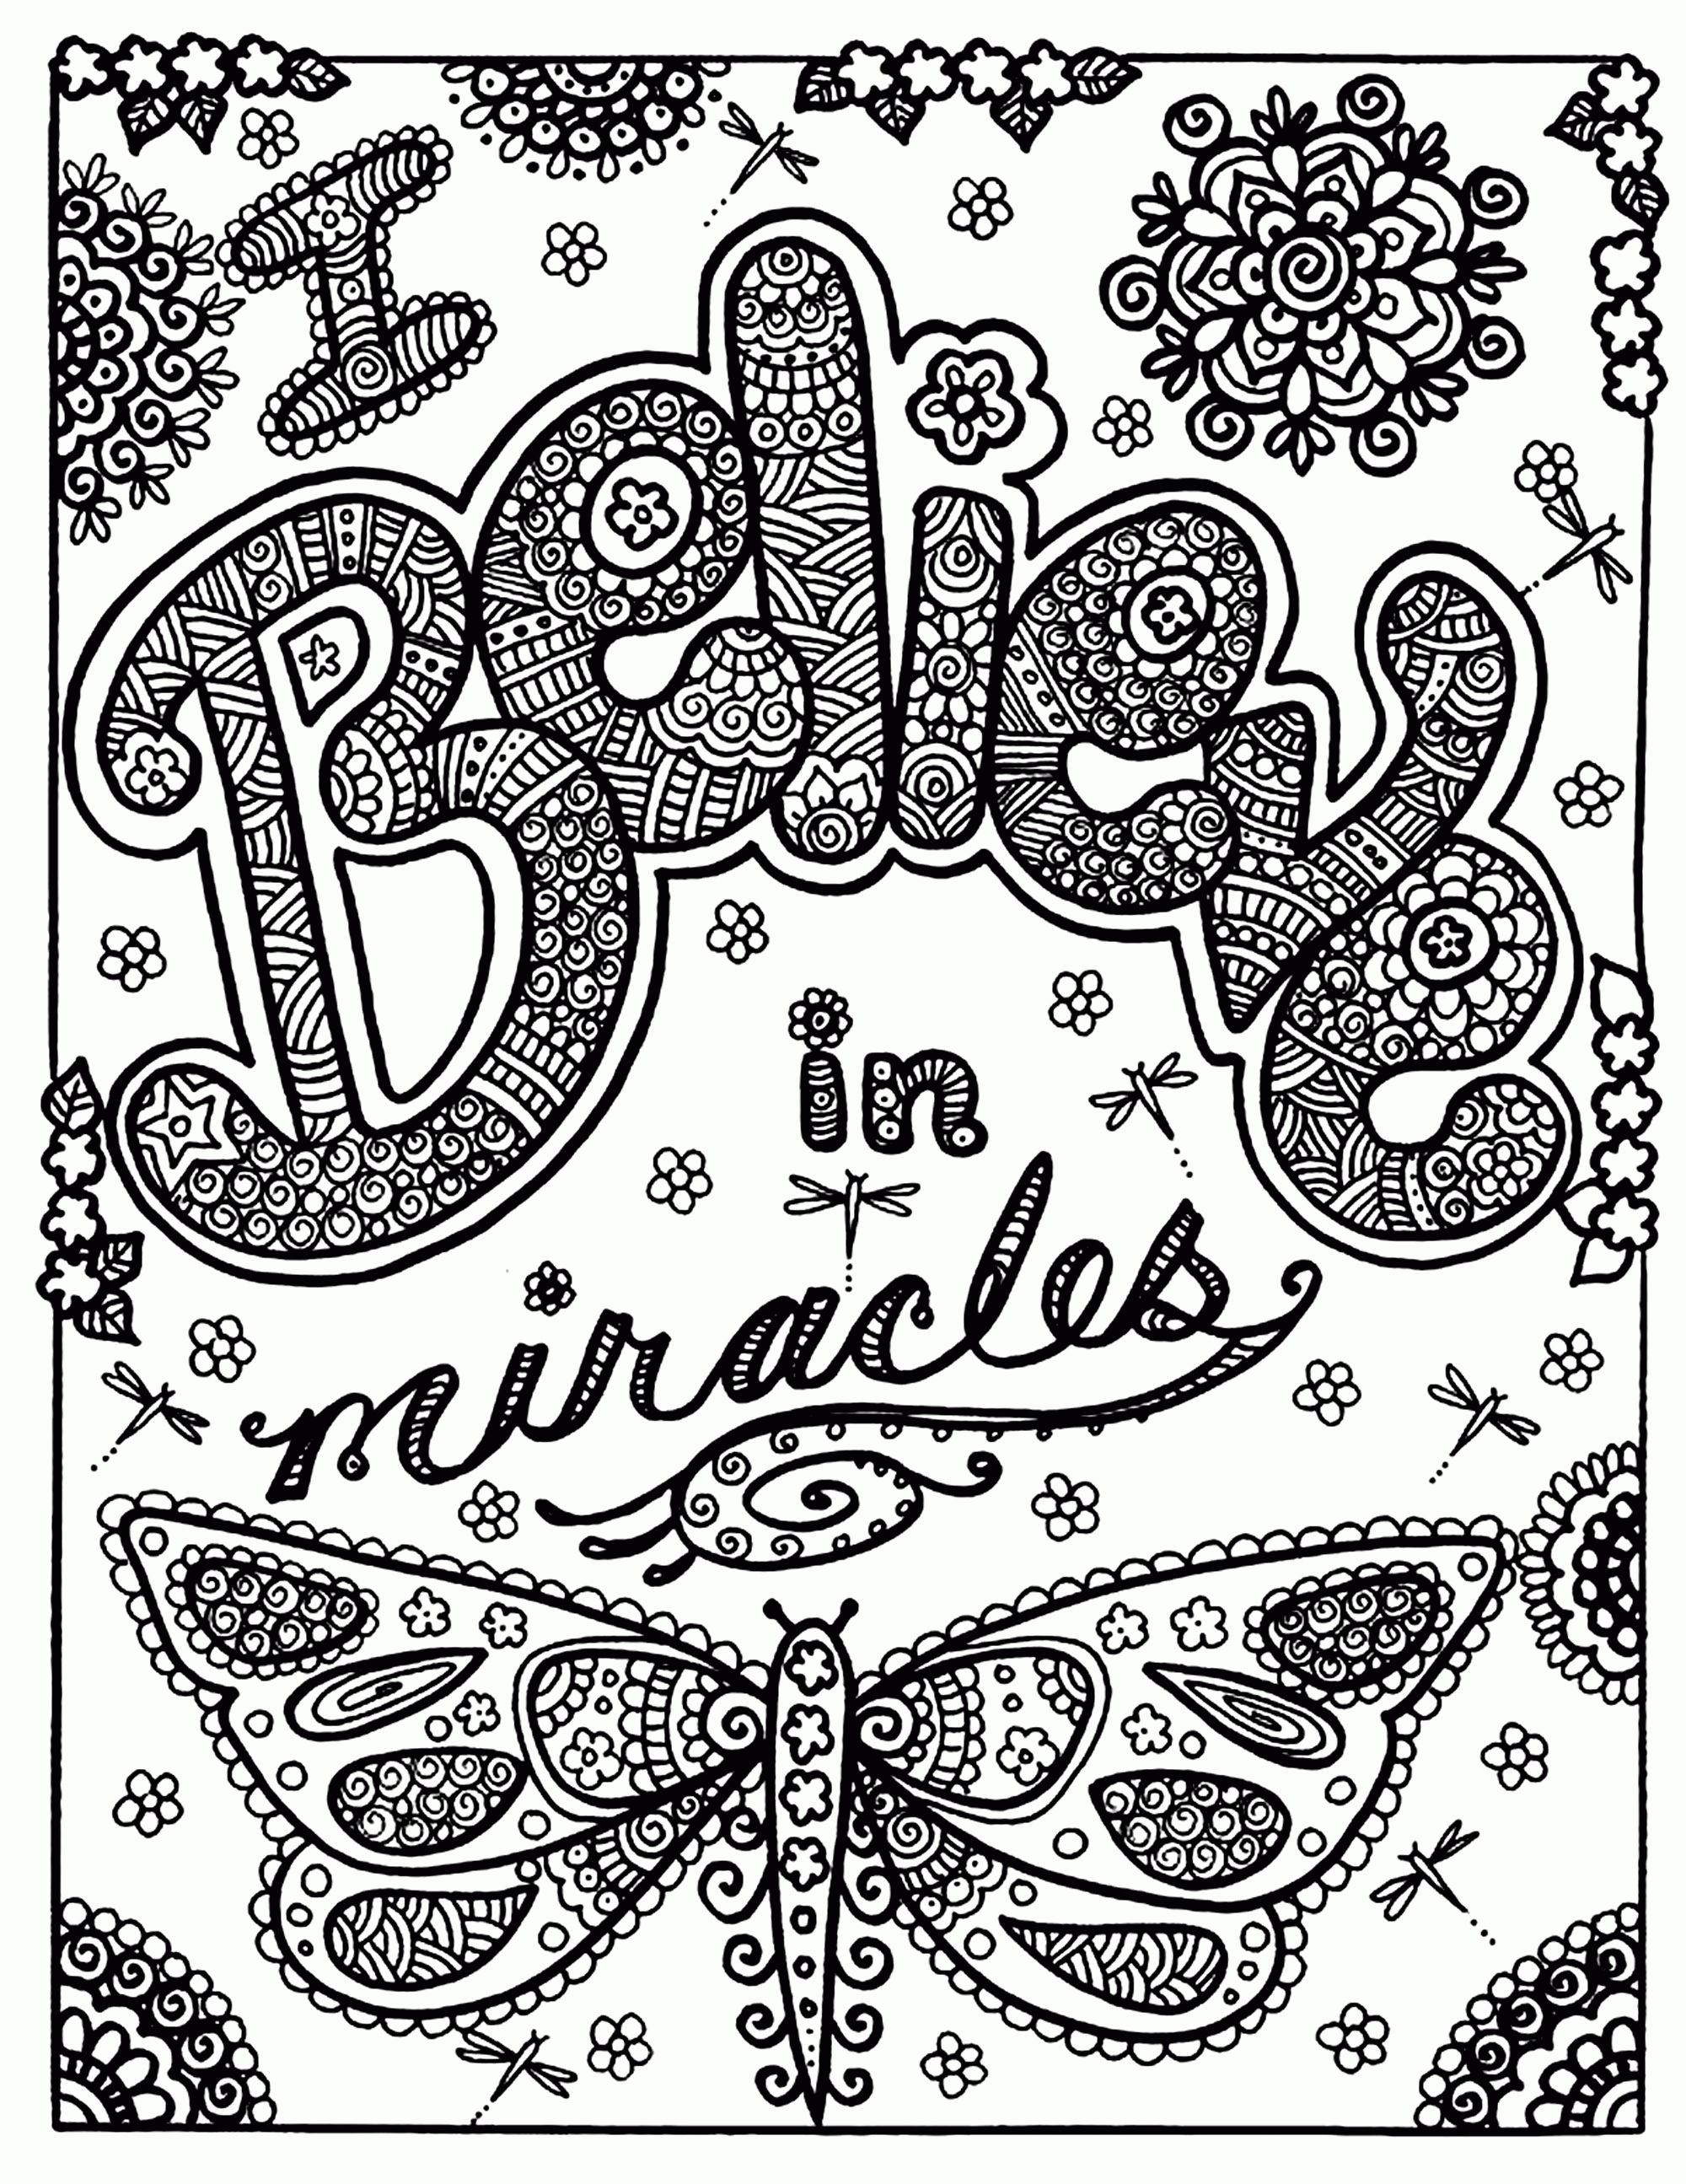 this-adult-butterfly-coloring-page-mackira-thanatos